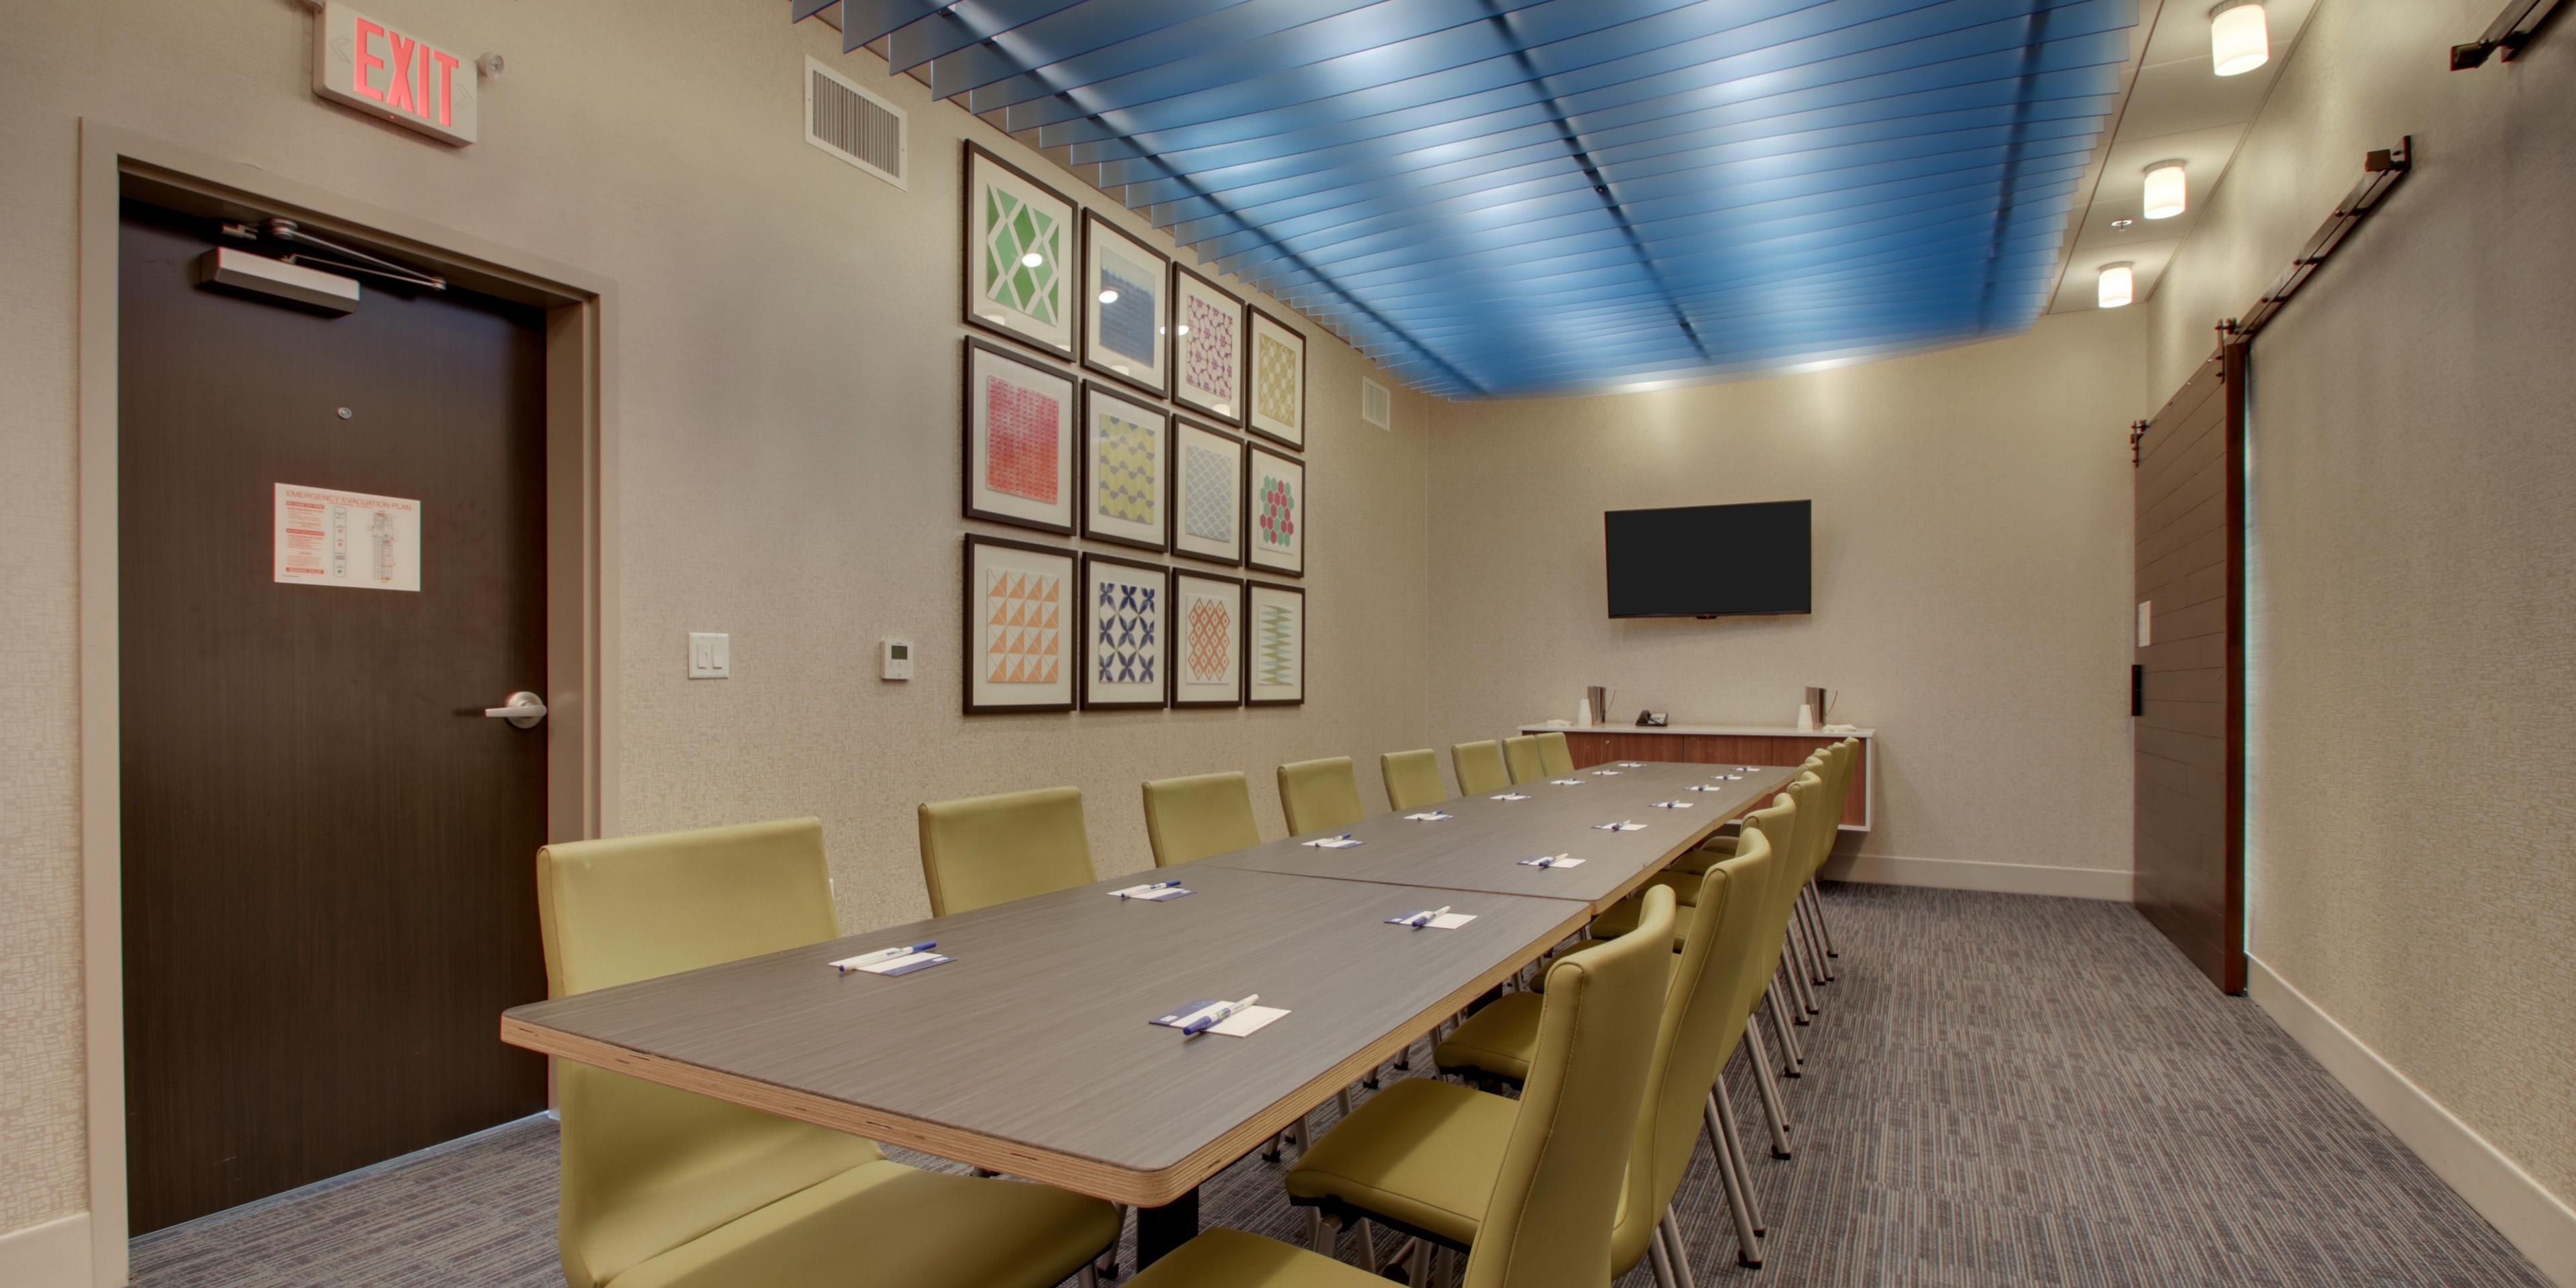 Have a small group that needs to quiet place to meet? We have the meeting room for you! Contact the hotel directly for availability and group pricing, 618-242-6710